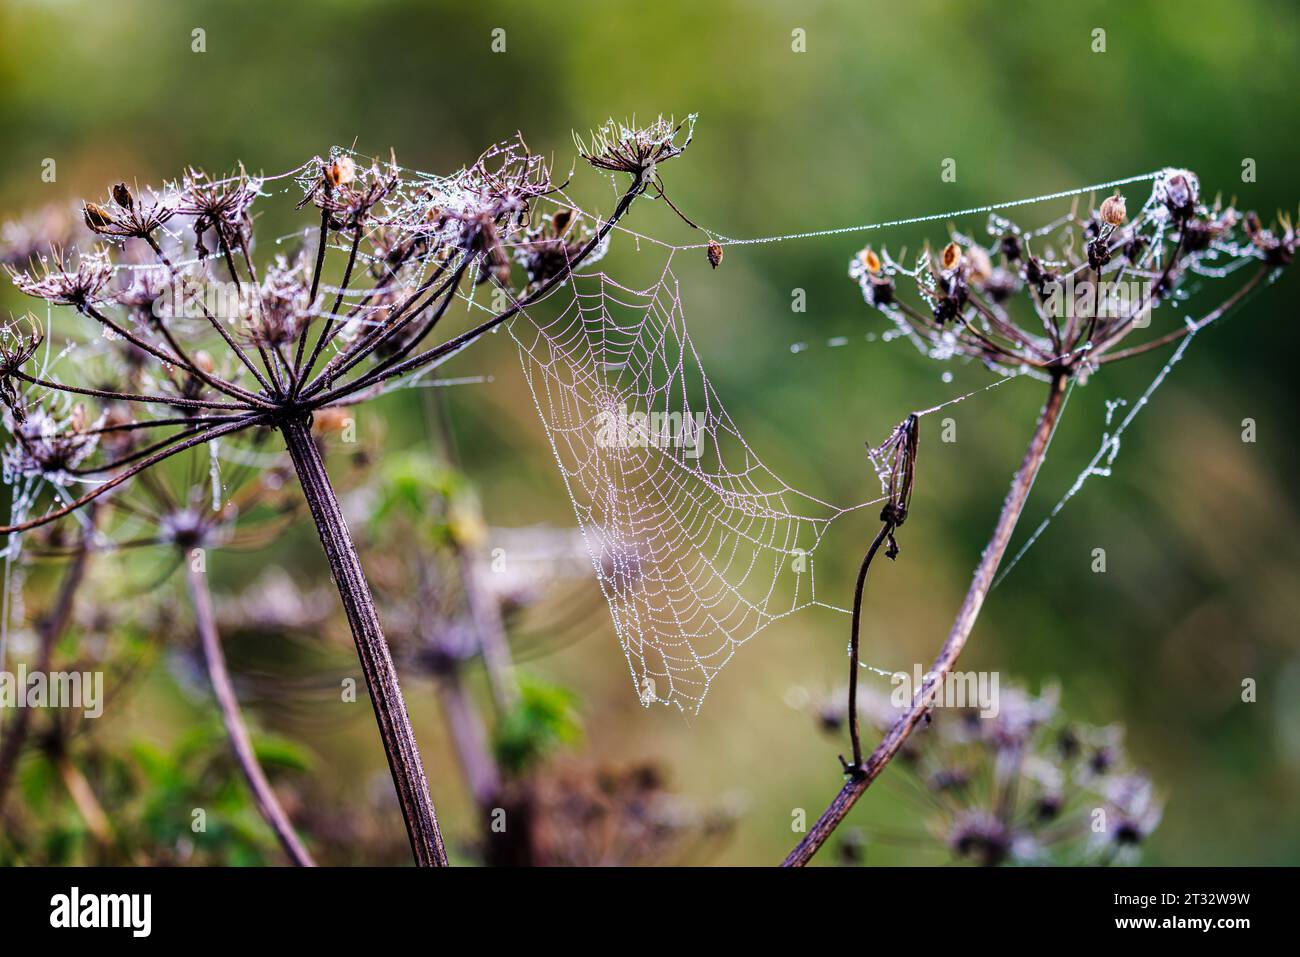 Spiders' webs on umbellifer plants in Heather Farm Wetland, Horsell Common, near Woking, Surrey with early morning dew droplets Stock Photo